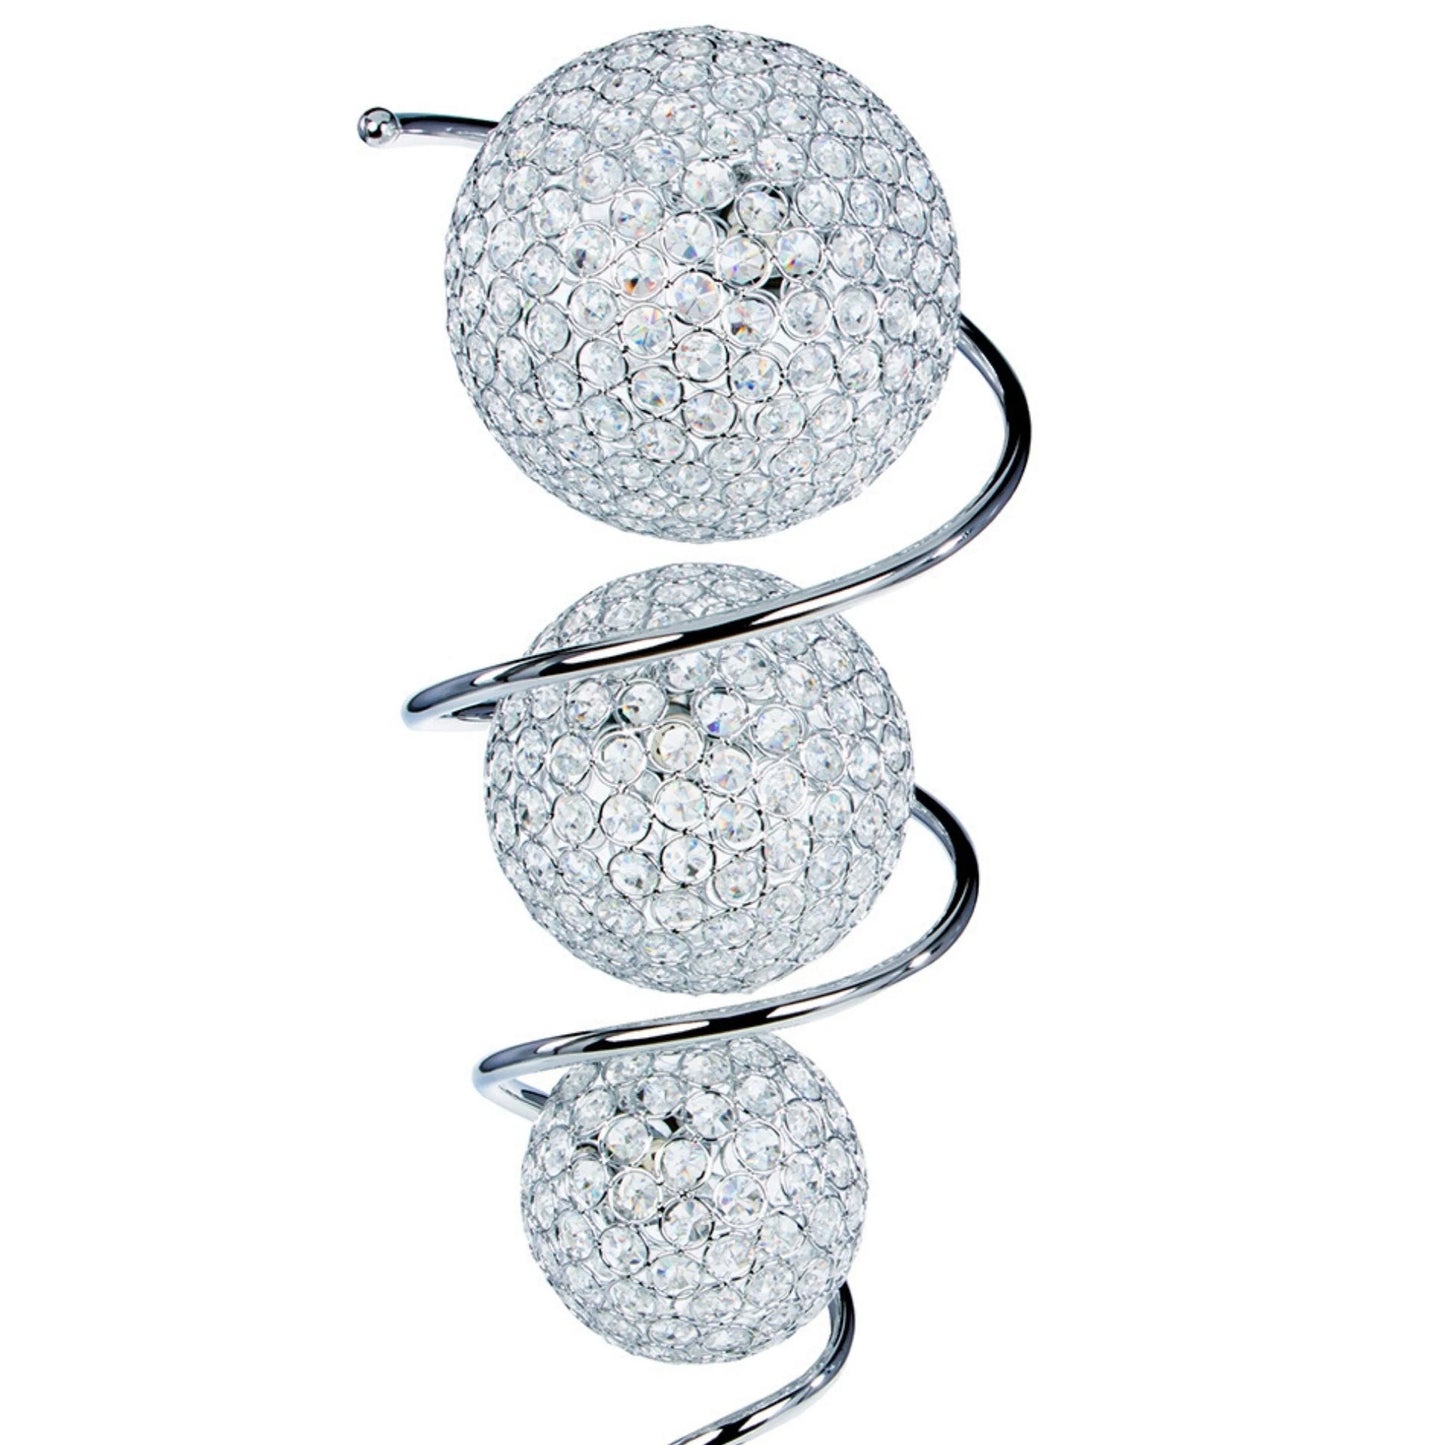 Finesse Decor Vertical Crystal Sphere 3-Light Table Lamp 4